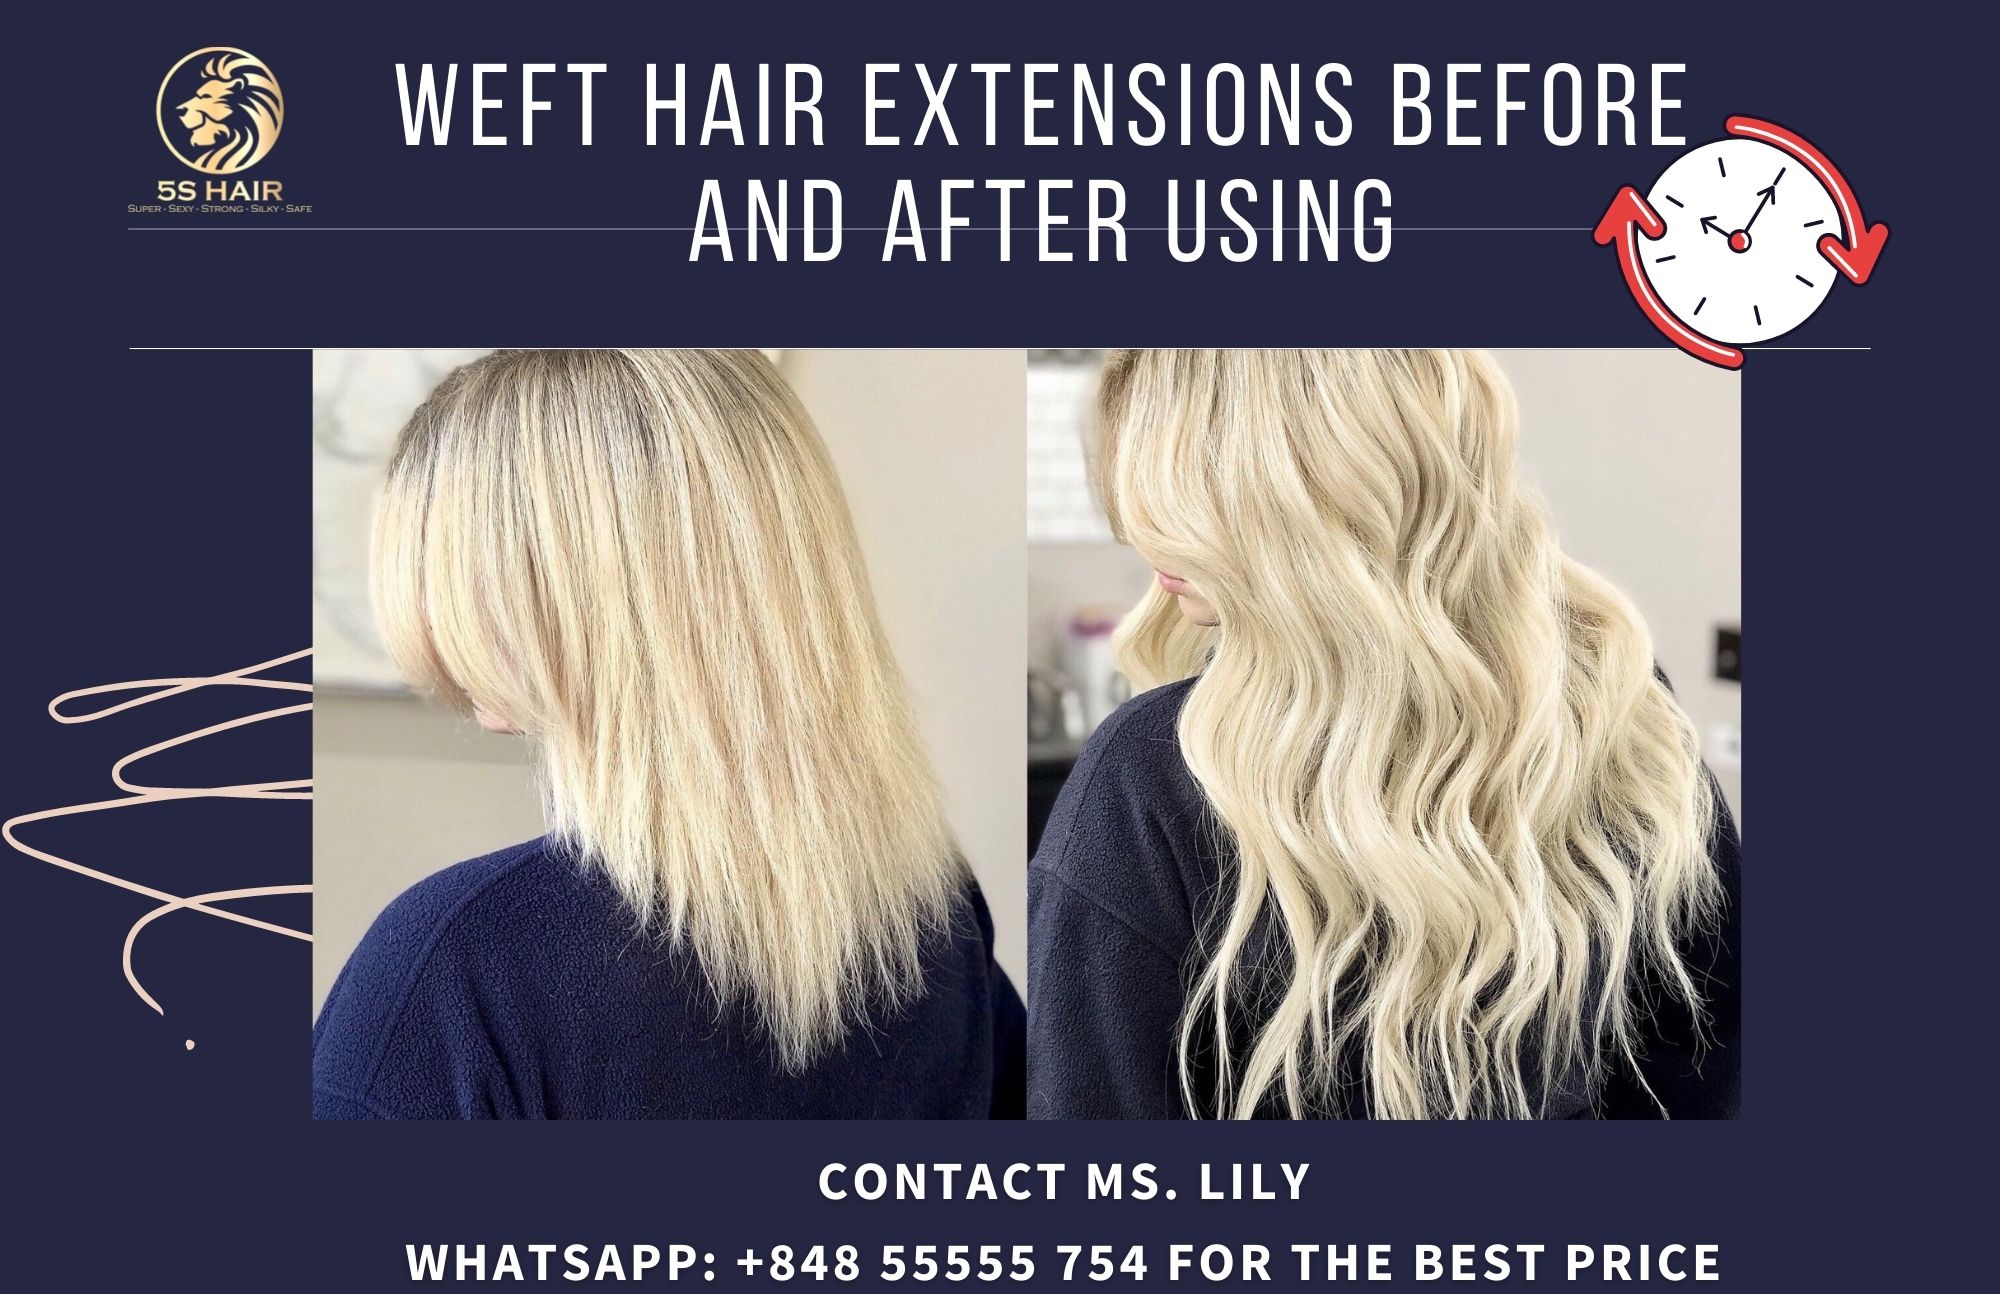 weft-hair-extensions-the-new-trend-of-the-hair-industry2